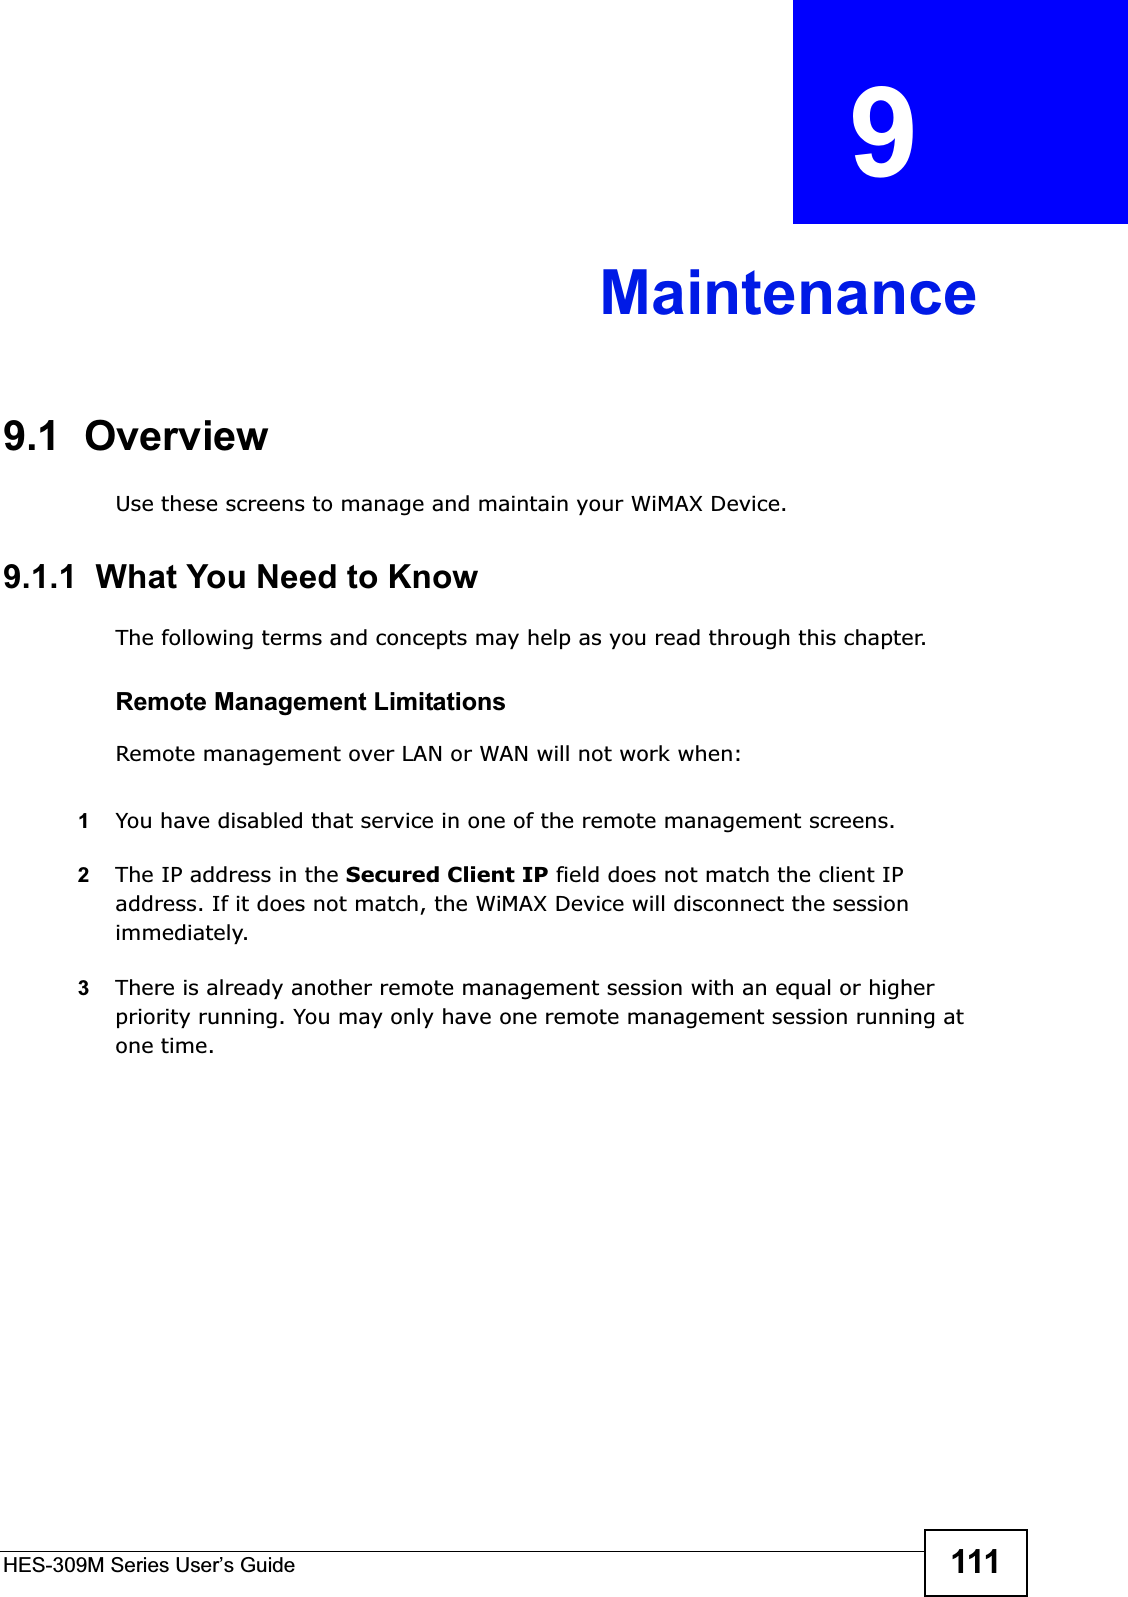 HES-309M Series User’s Guide 111CHAPTER  9 Maintenance9.1  OverviewUse these screens to manage and maintain your WiMAX Device.9.1.1  What You Need to KnowThe following terms and concepts may help as you read through this chapter.Remote Management LimitationsRemote management over LAN or WAN will not work when:1You have disabled that service in one of the remote management screens.2The IP address in the Secured Client IP field does not match the client IP address. If it does not match, the WiMAX Device will disconnect the session immediately.3There is already another remote management session with an equal or higher priority running. You may only have one remote management session running at one time.